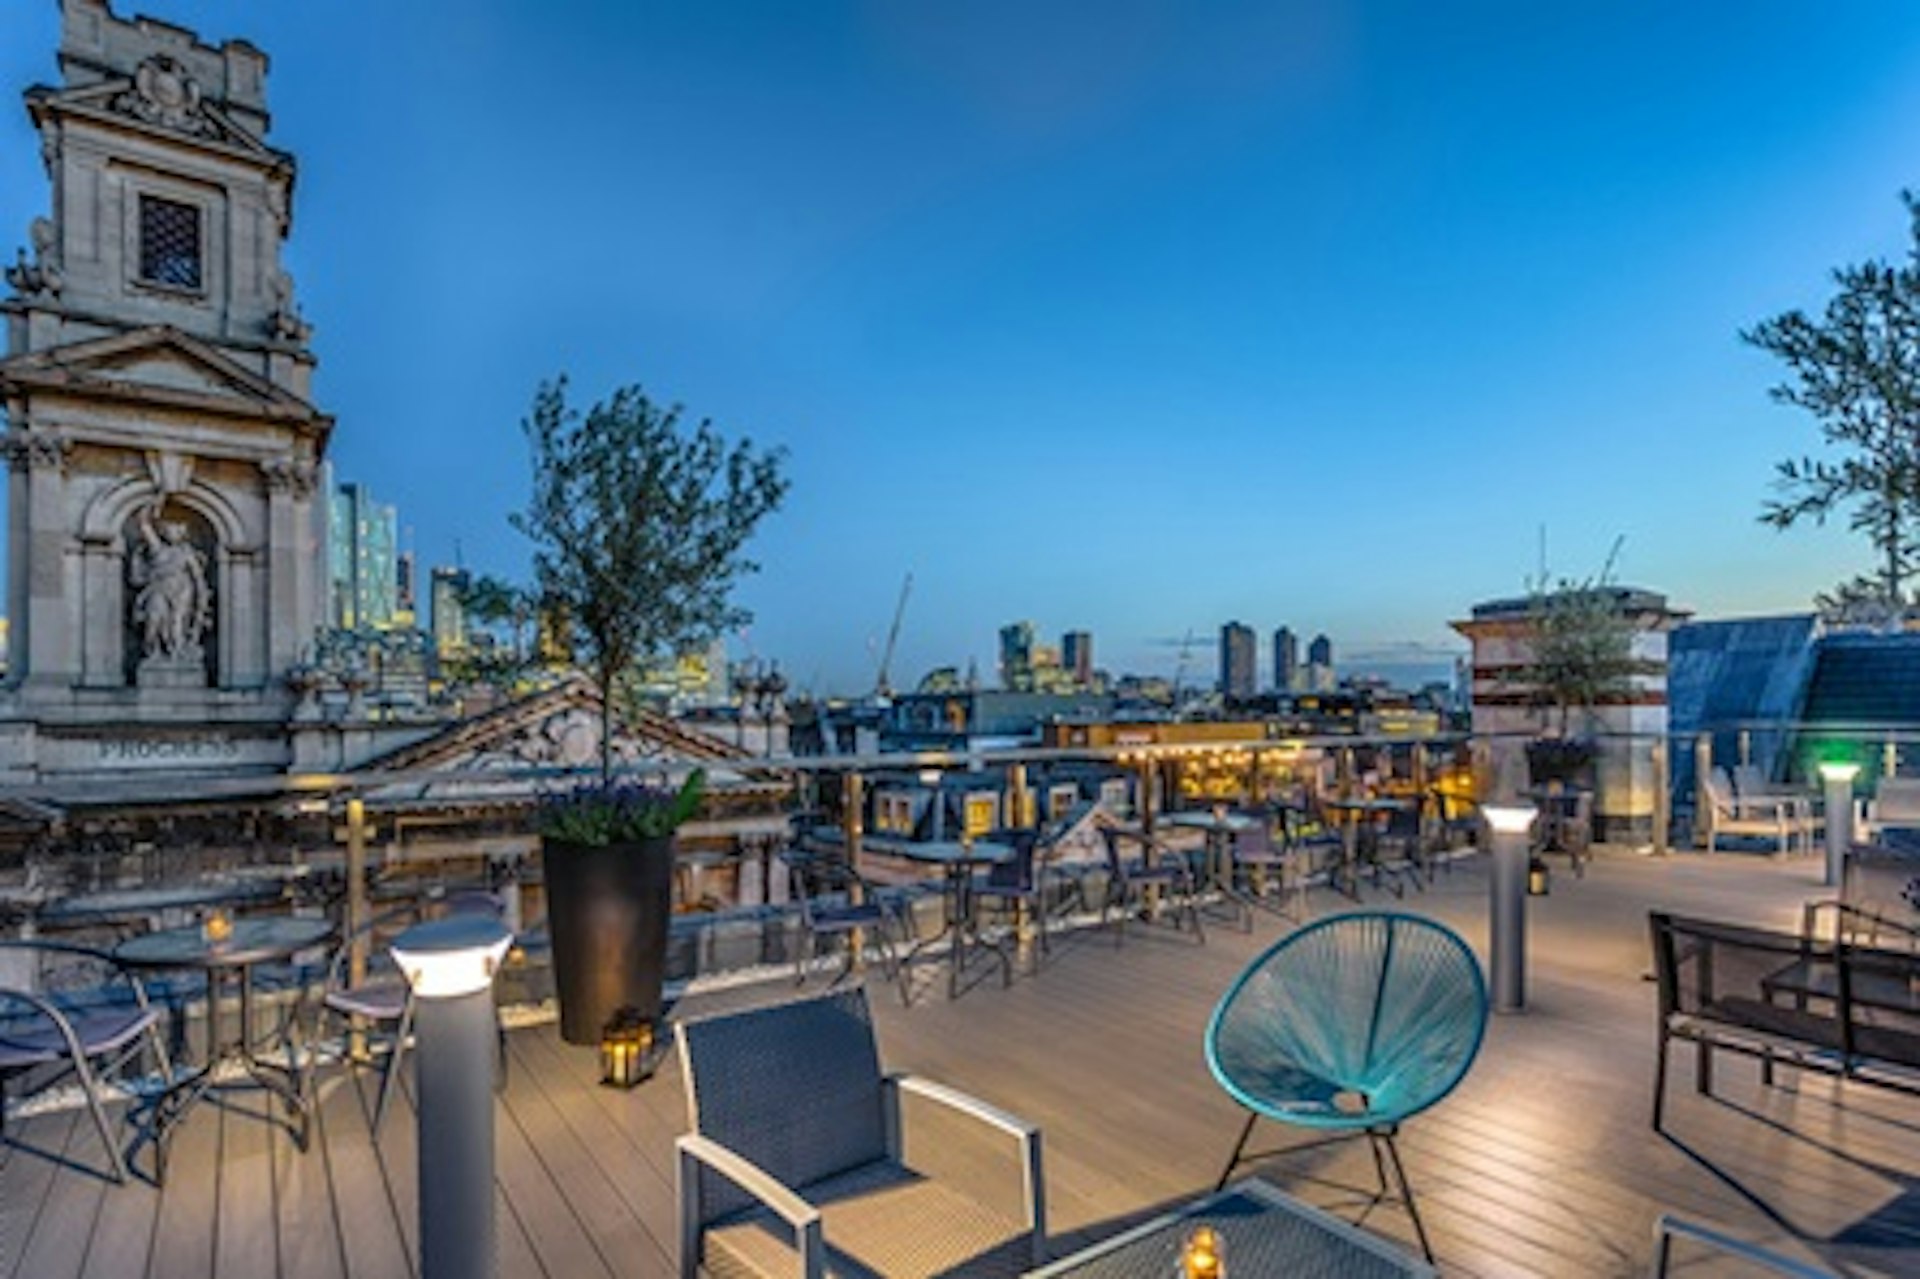 One Night London Break for Two at the 5* Courthouse Hotel, Shoreditch 4